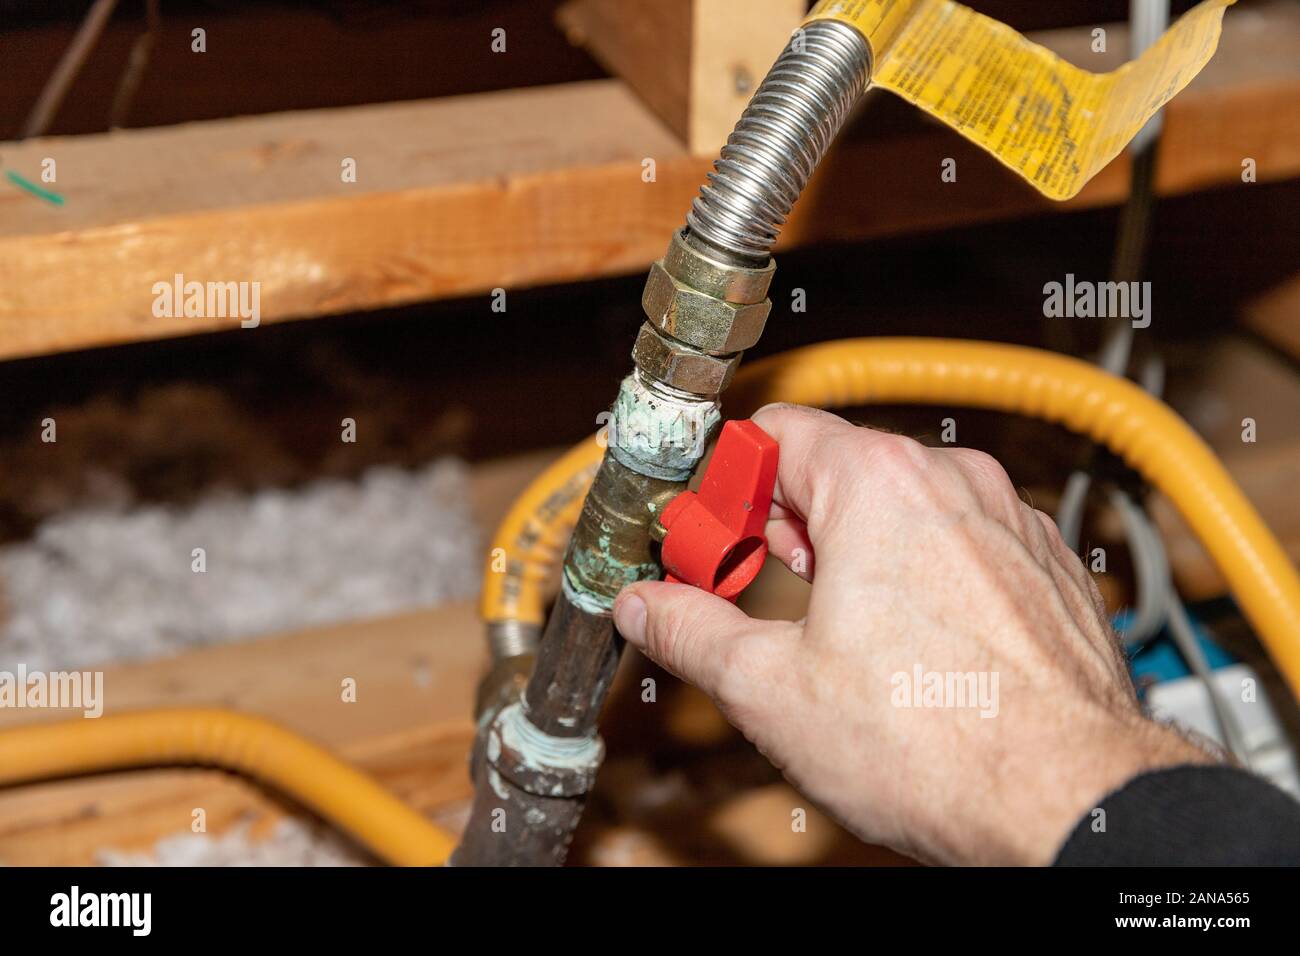 Hand turning safety shut off valve of a natural gas pipe Stock Photo